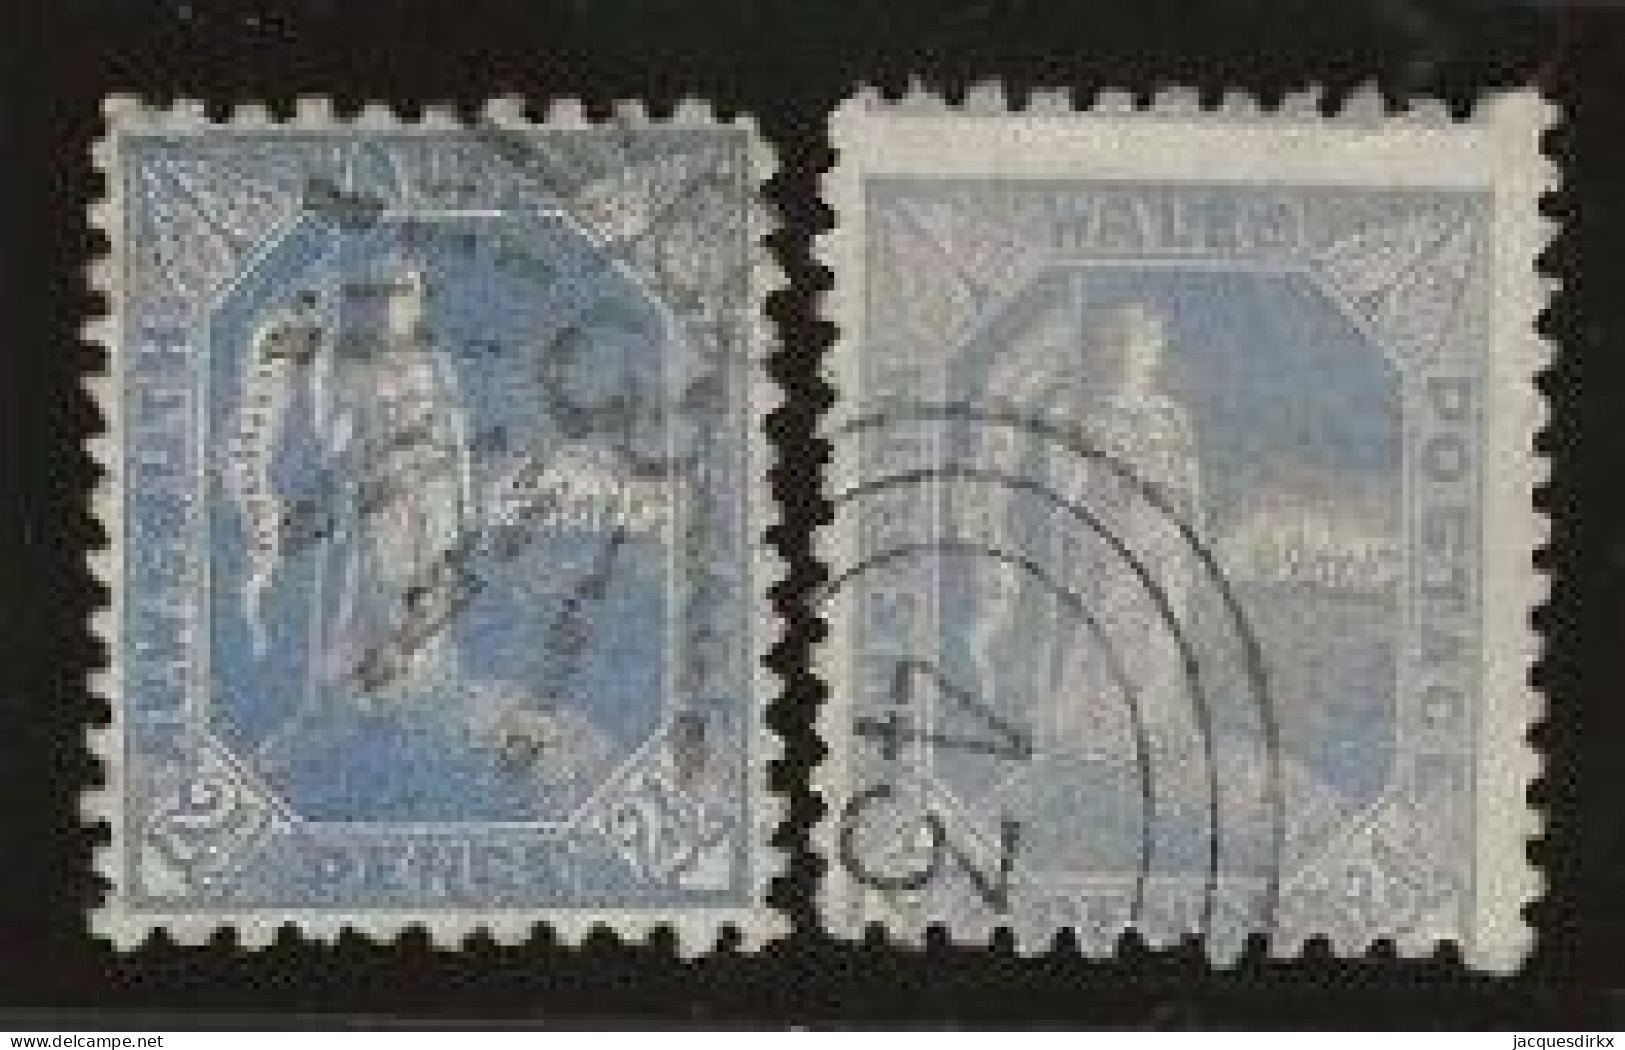 New South Wales      .   SG    .   265  2x      .   O      .     Cancelled - Usados